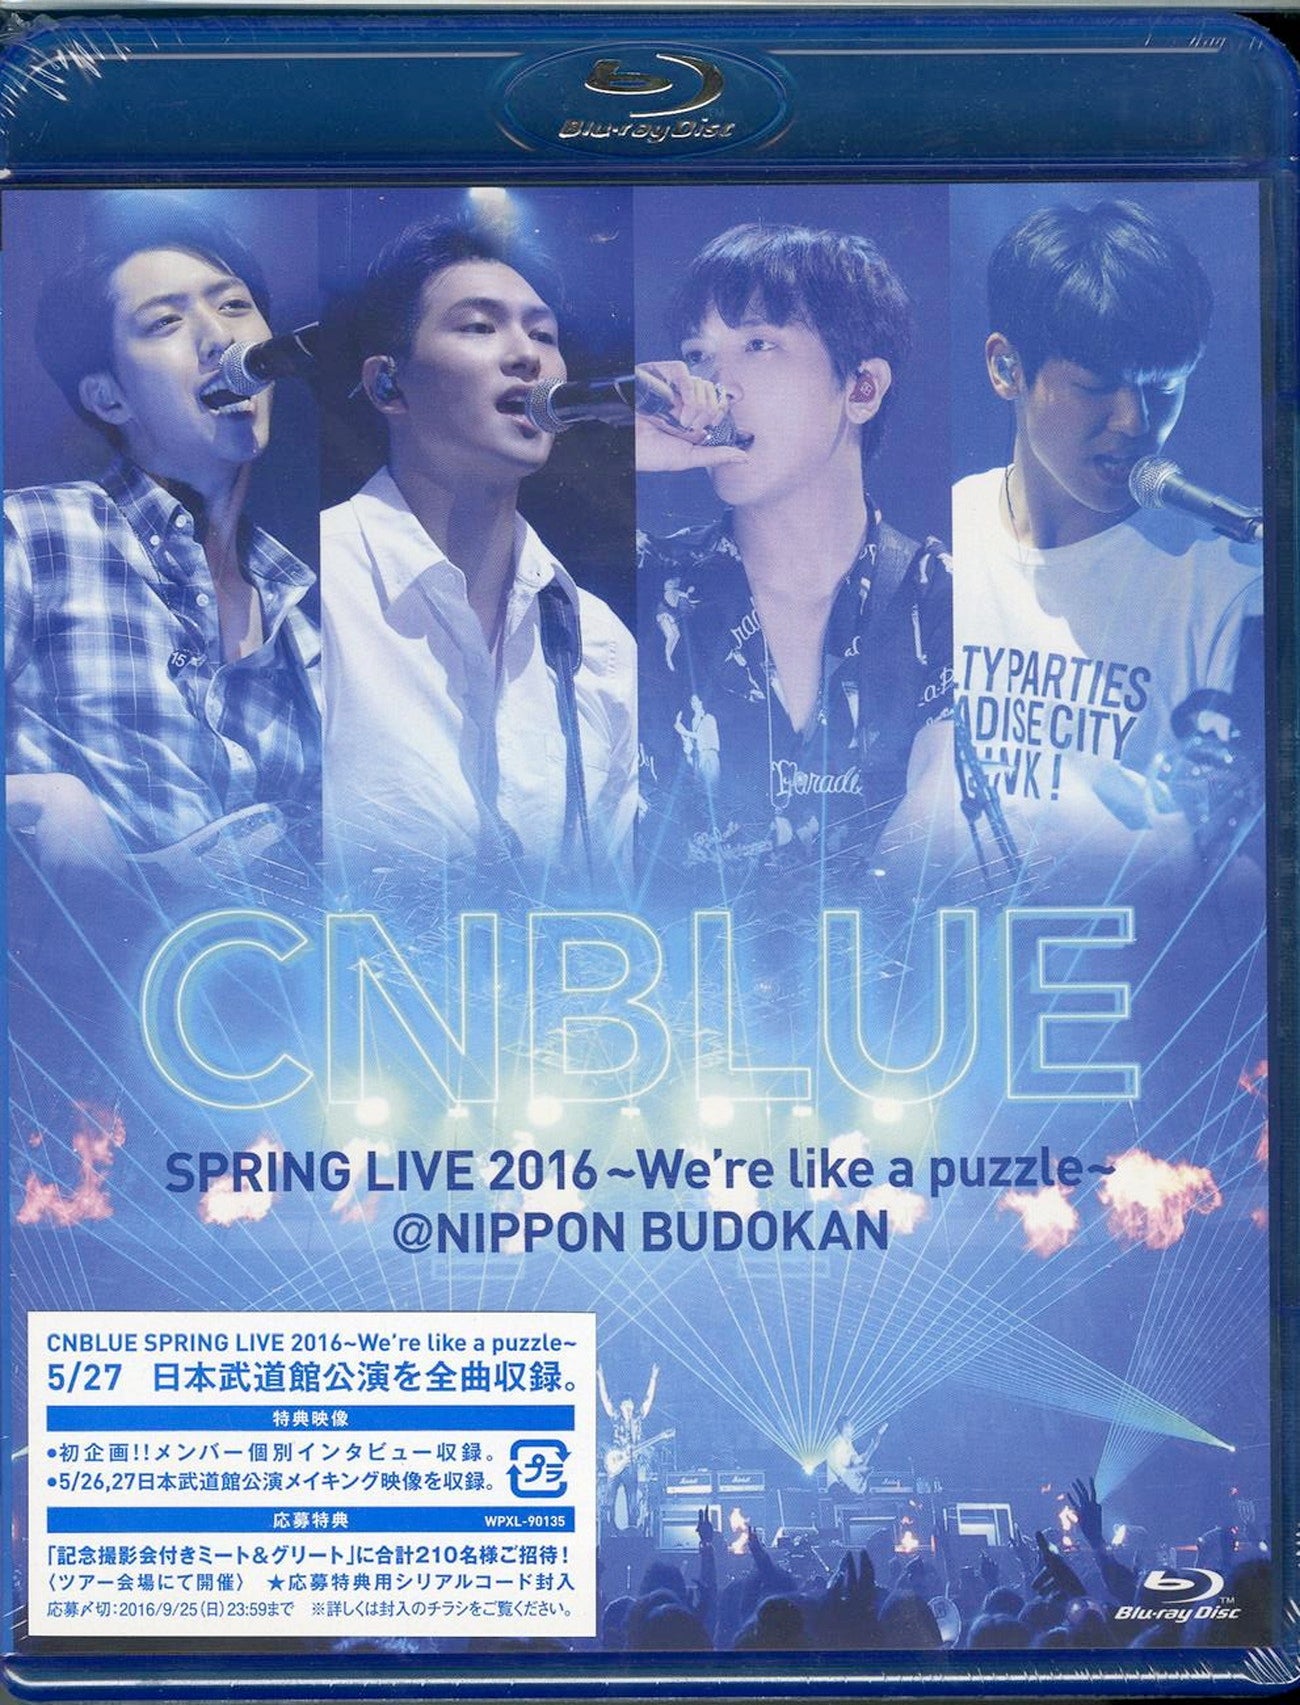 Cnblue - Spring Live 2016 We'Re Like A Puzzle at Nippon Budokan